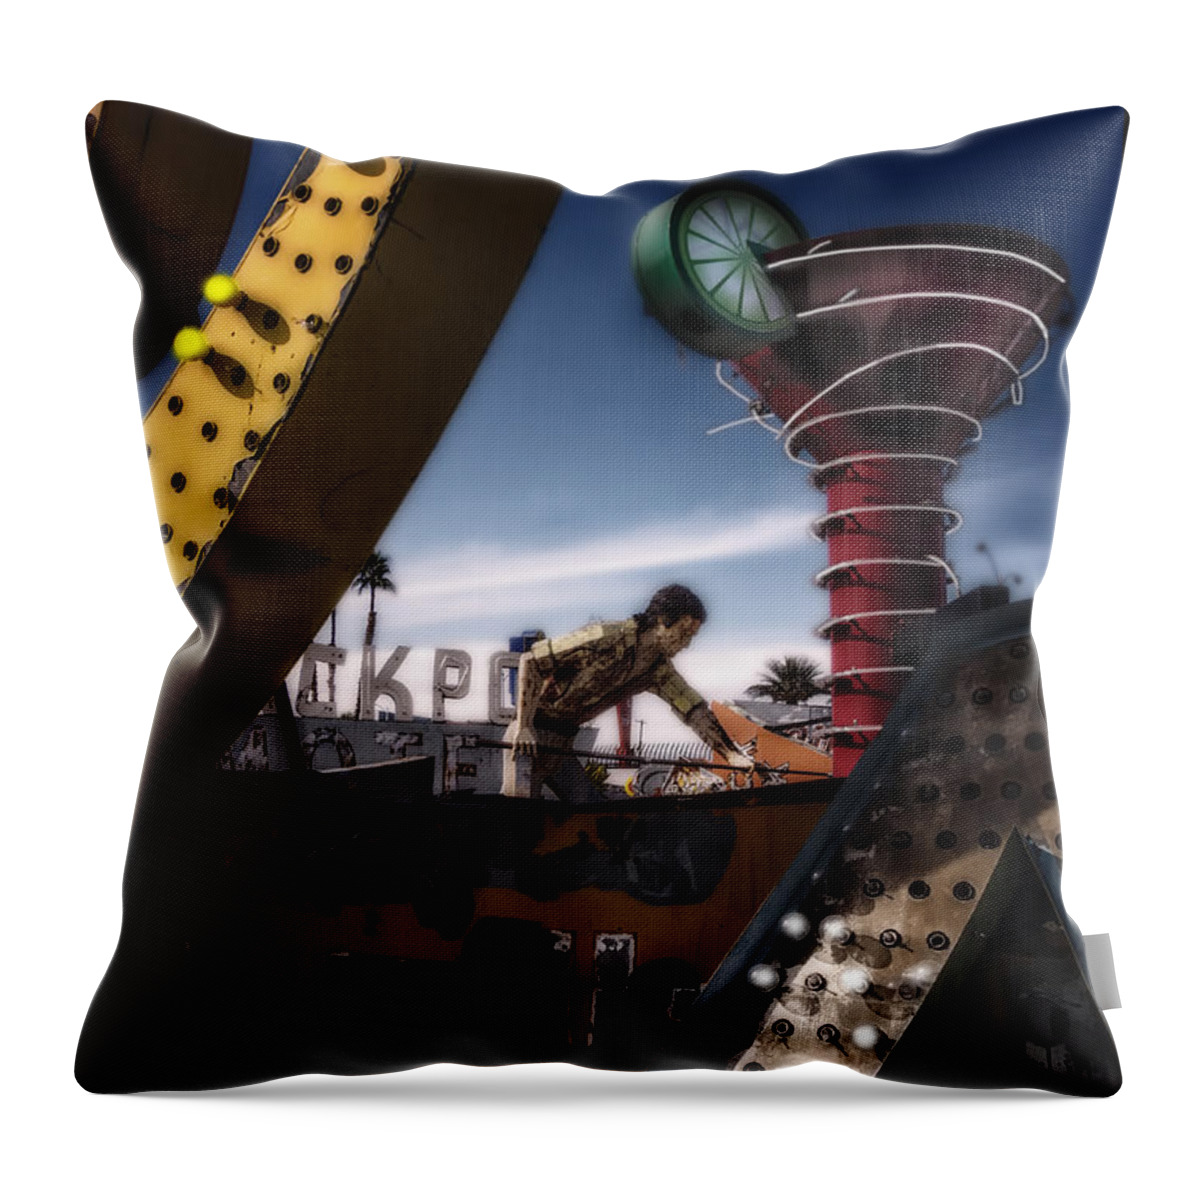  Throw Pillow featuring the photograph Neon One by Gary Warnimont